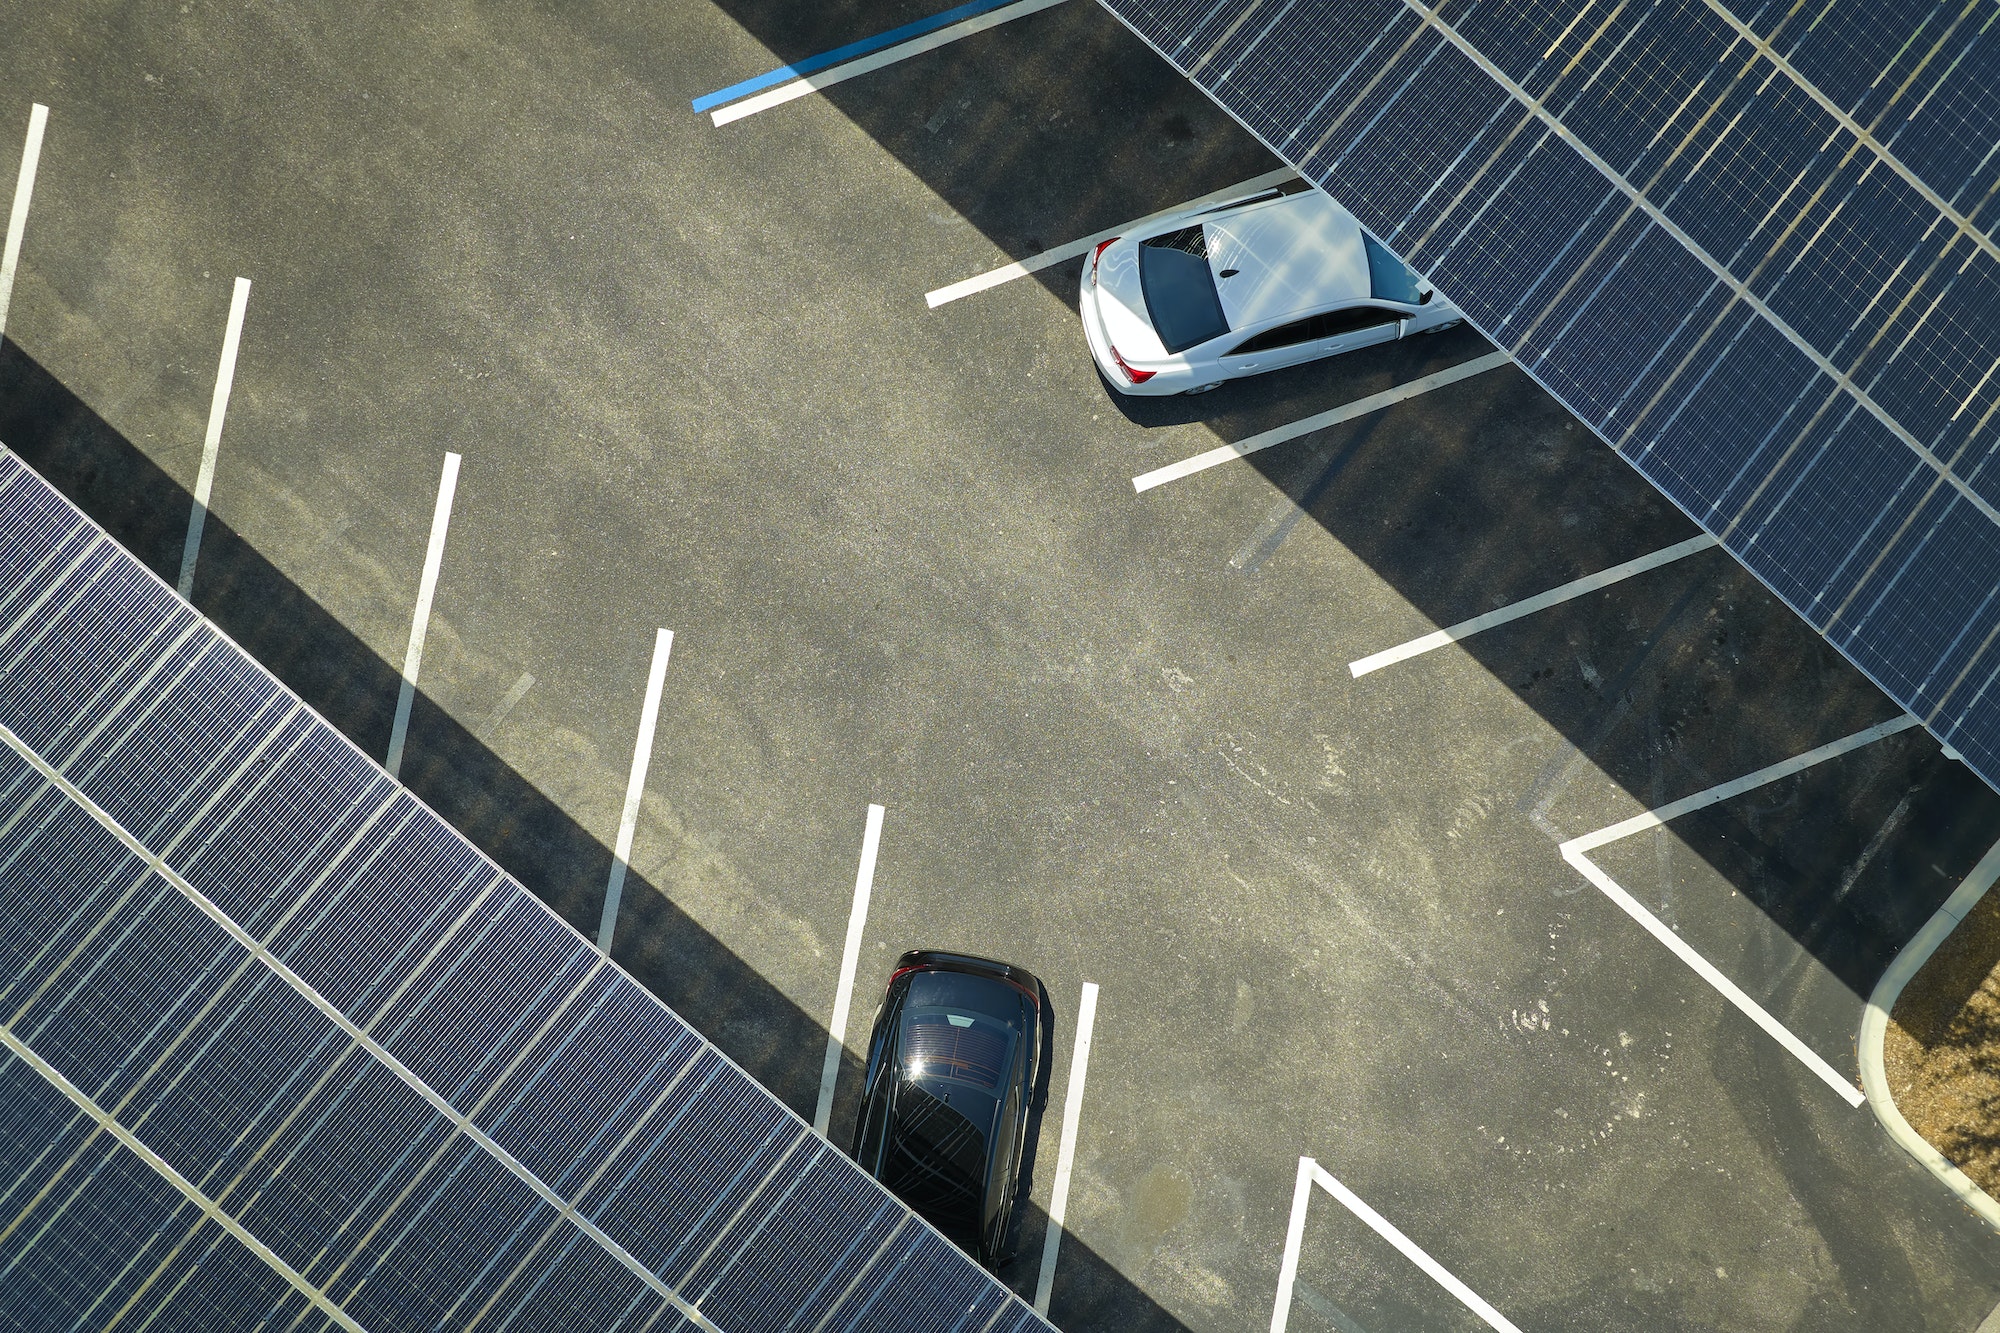 Solar panels installed over parking lot for parked cars for effective generation of clean energy